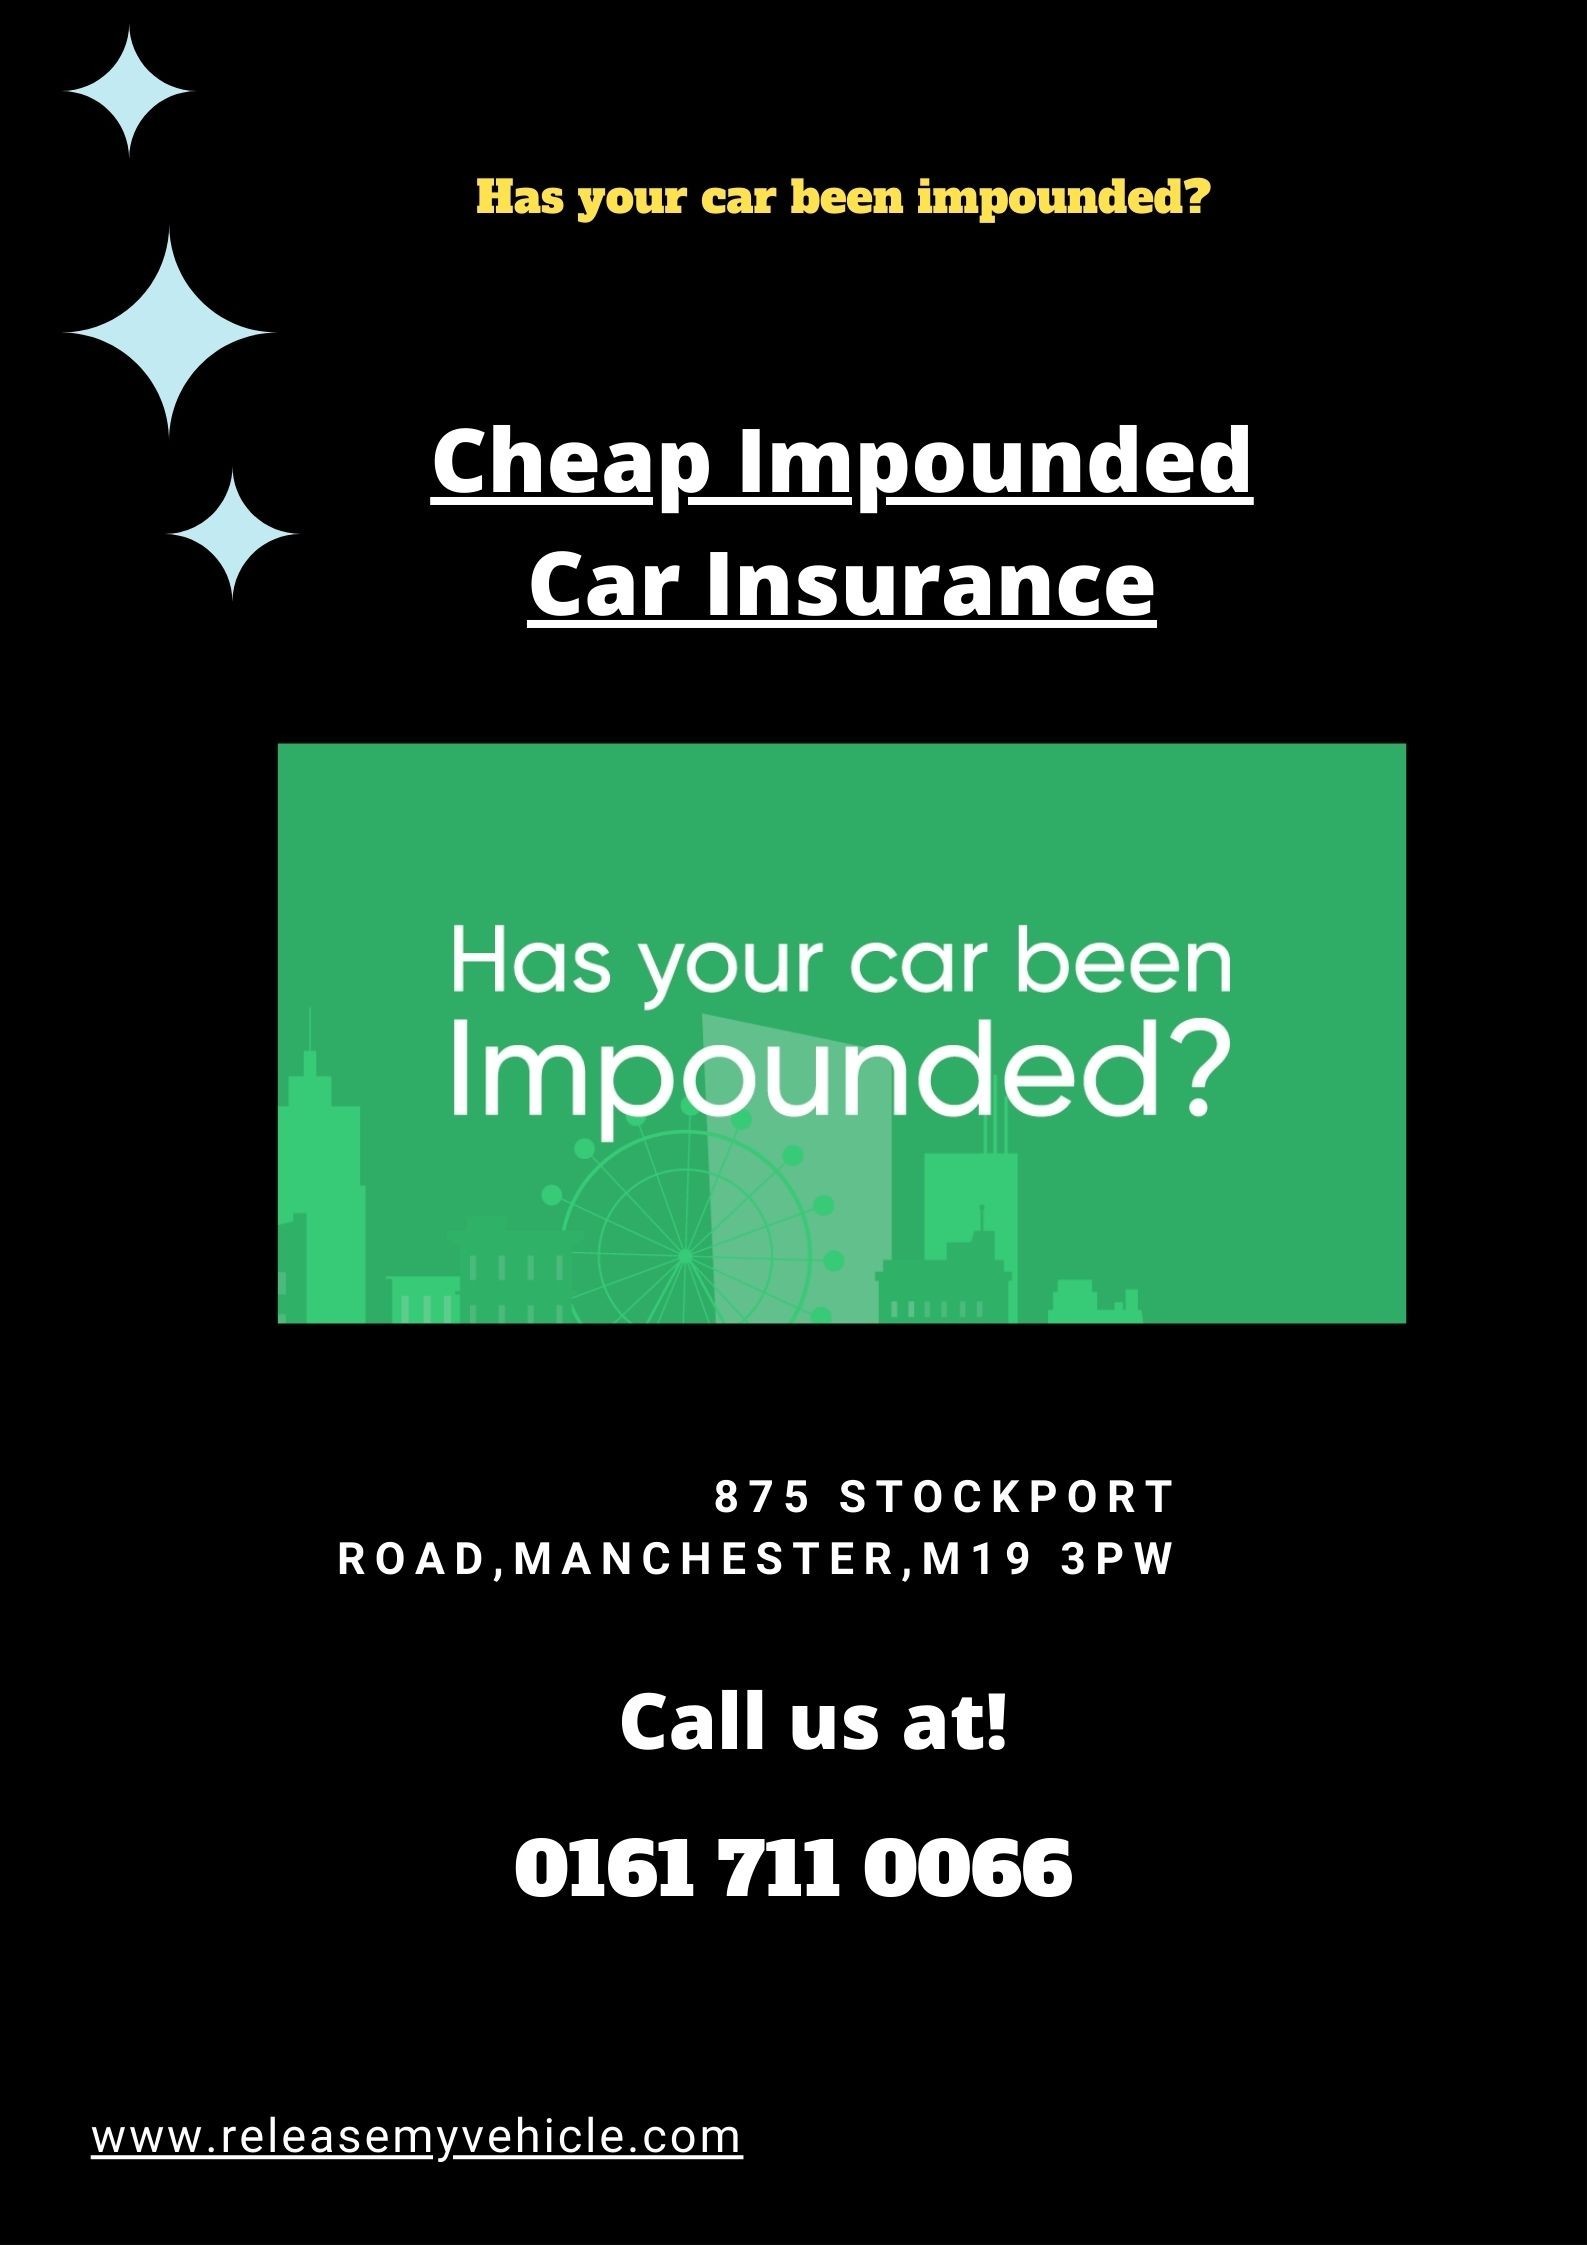 Cheap impounded car insurance